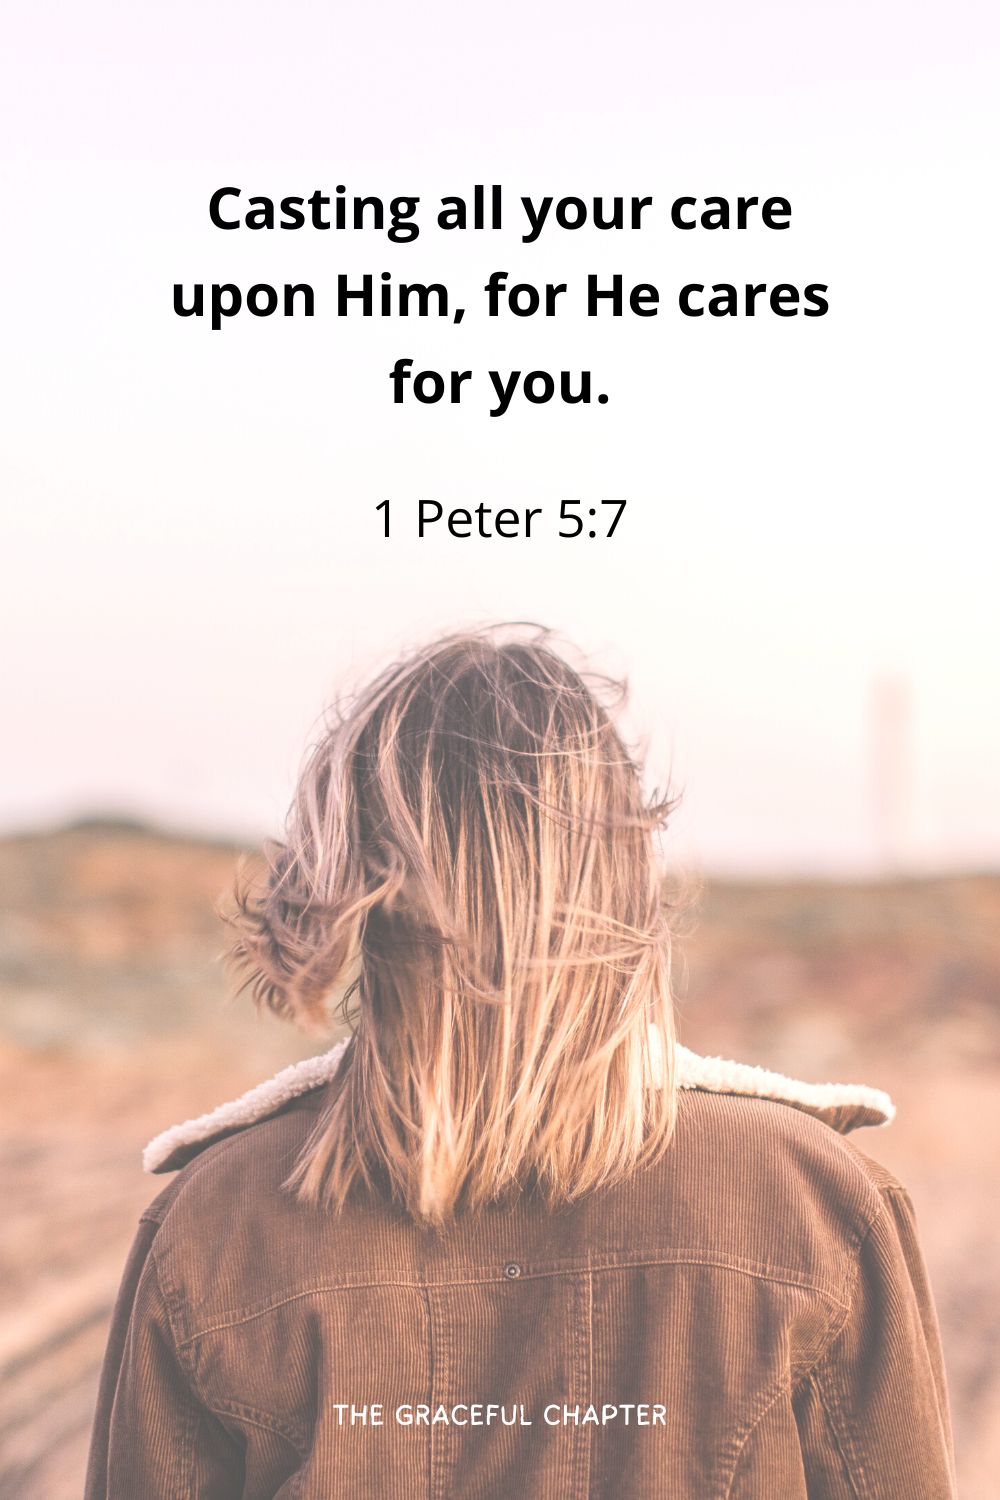 Casting all your care upon Him, for He cares for you.